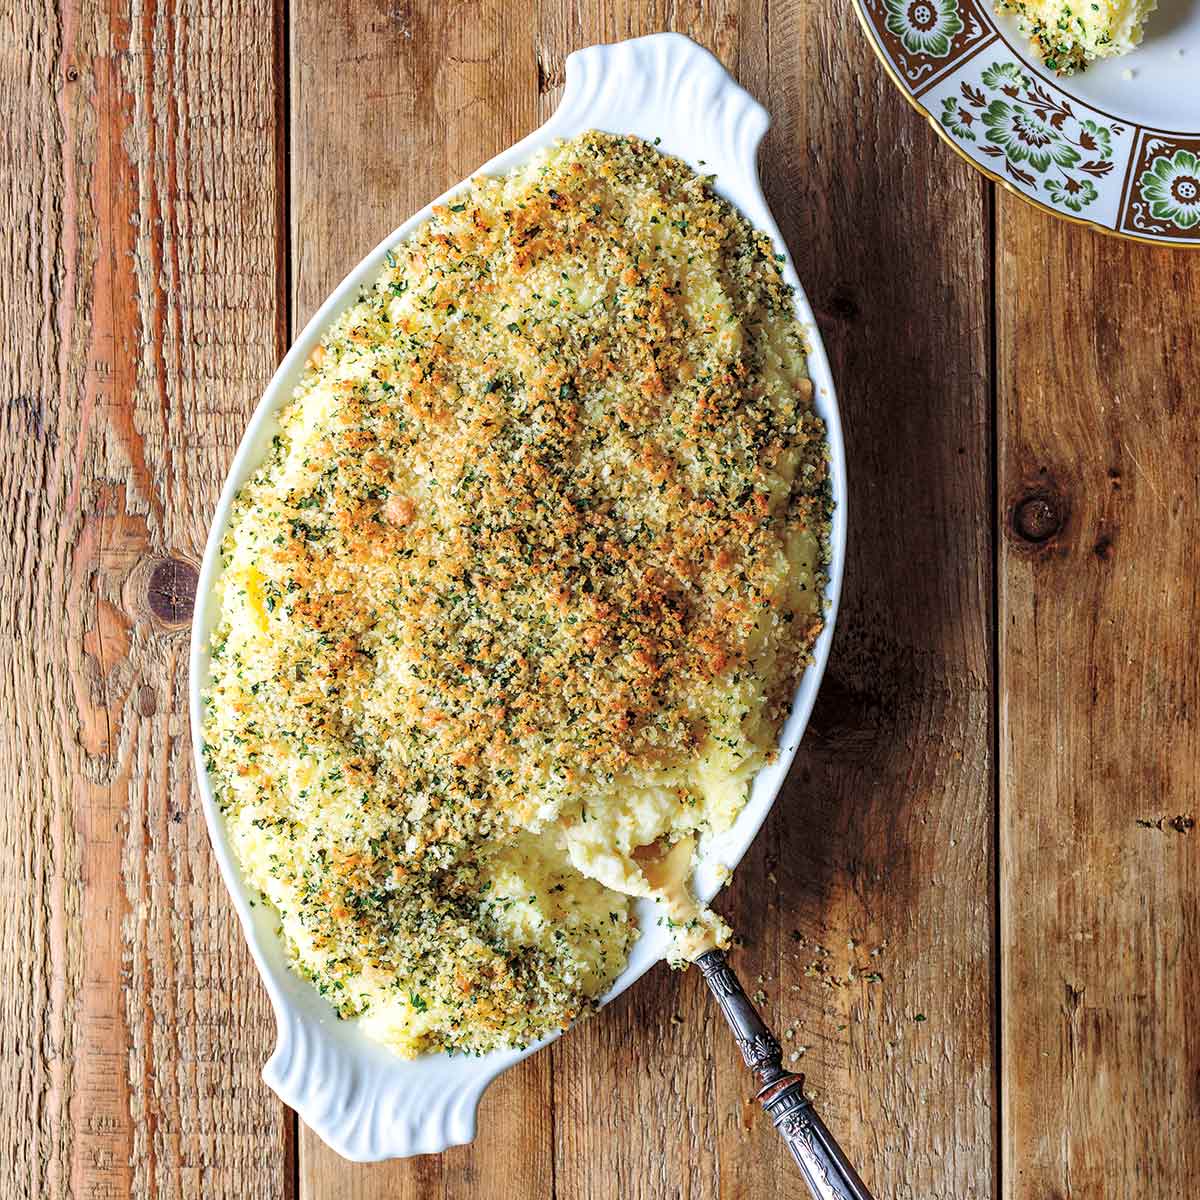 An oval serving dish filled with mashed potato gratin and a portion of it on a plate beside the dish.